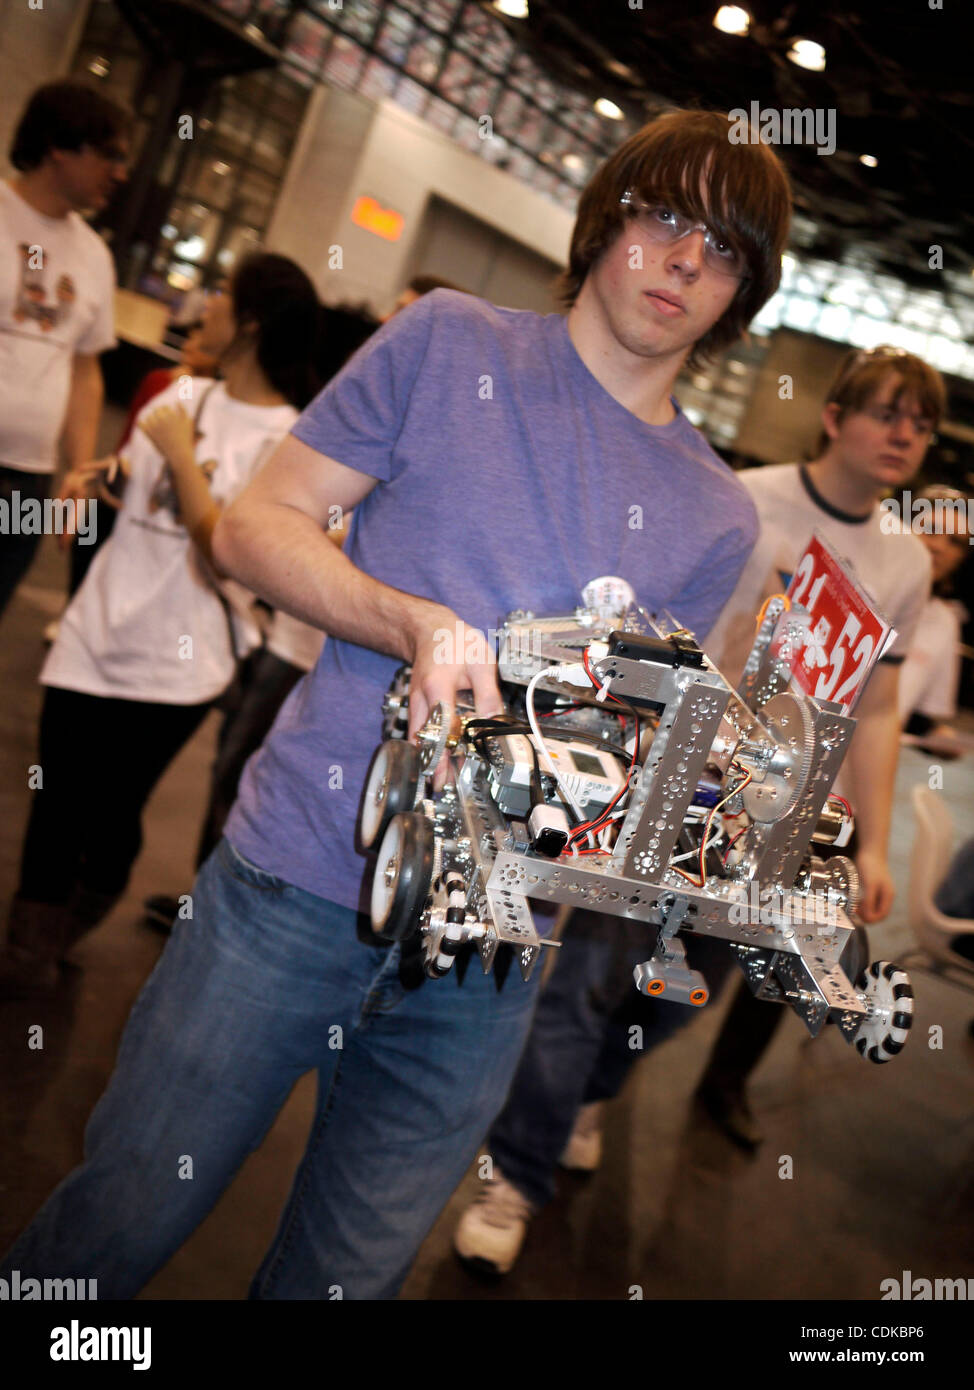 Mar. 15, 2011 - New York, New York, U.S. - The FIRST Robotics Competition helps high school students discover the professional life of engineers and researchers. The event challenges teams of students and their mentors to solve science and technology problems in six weeks. Teams build robots from st Stock Photo